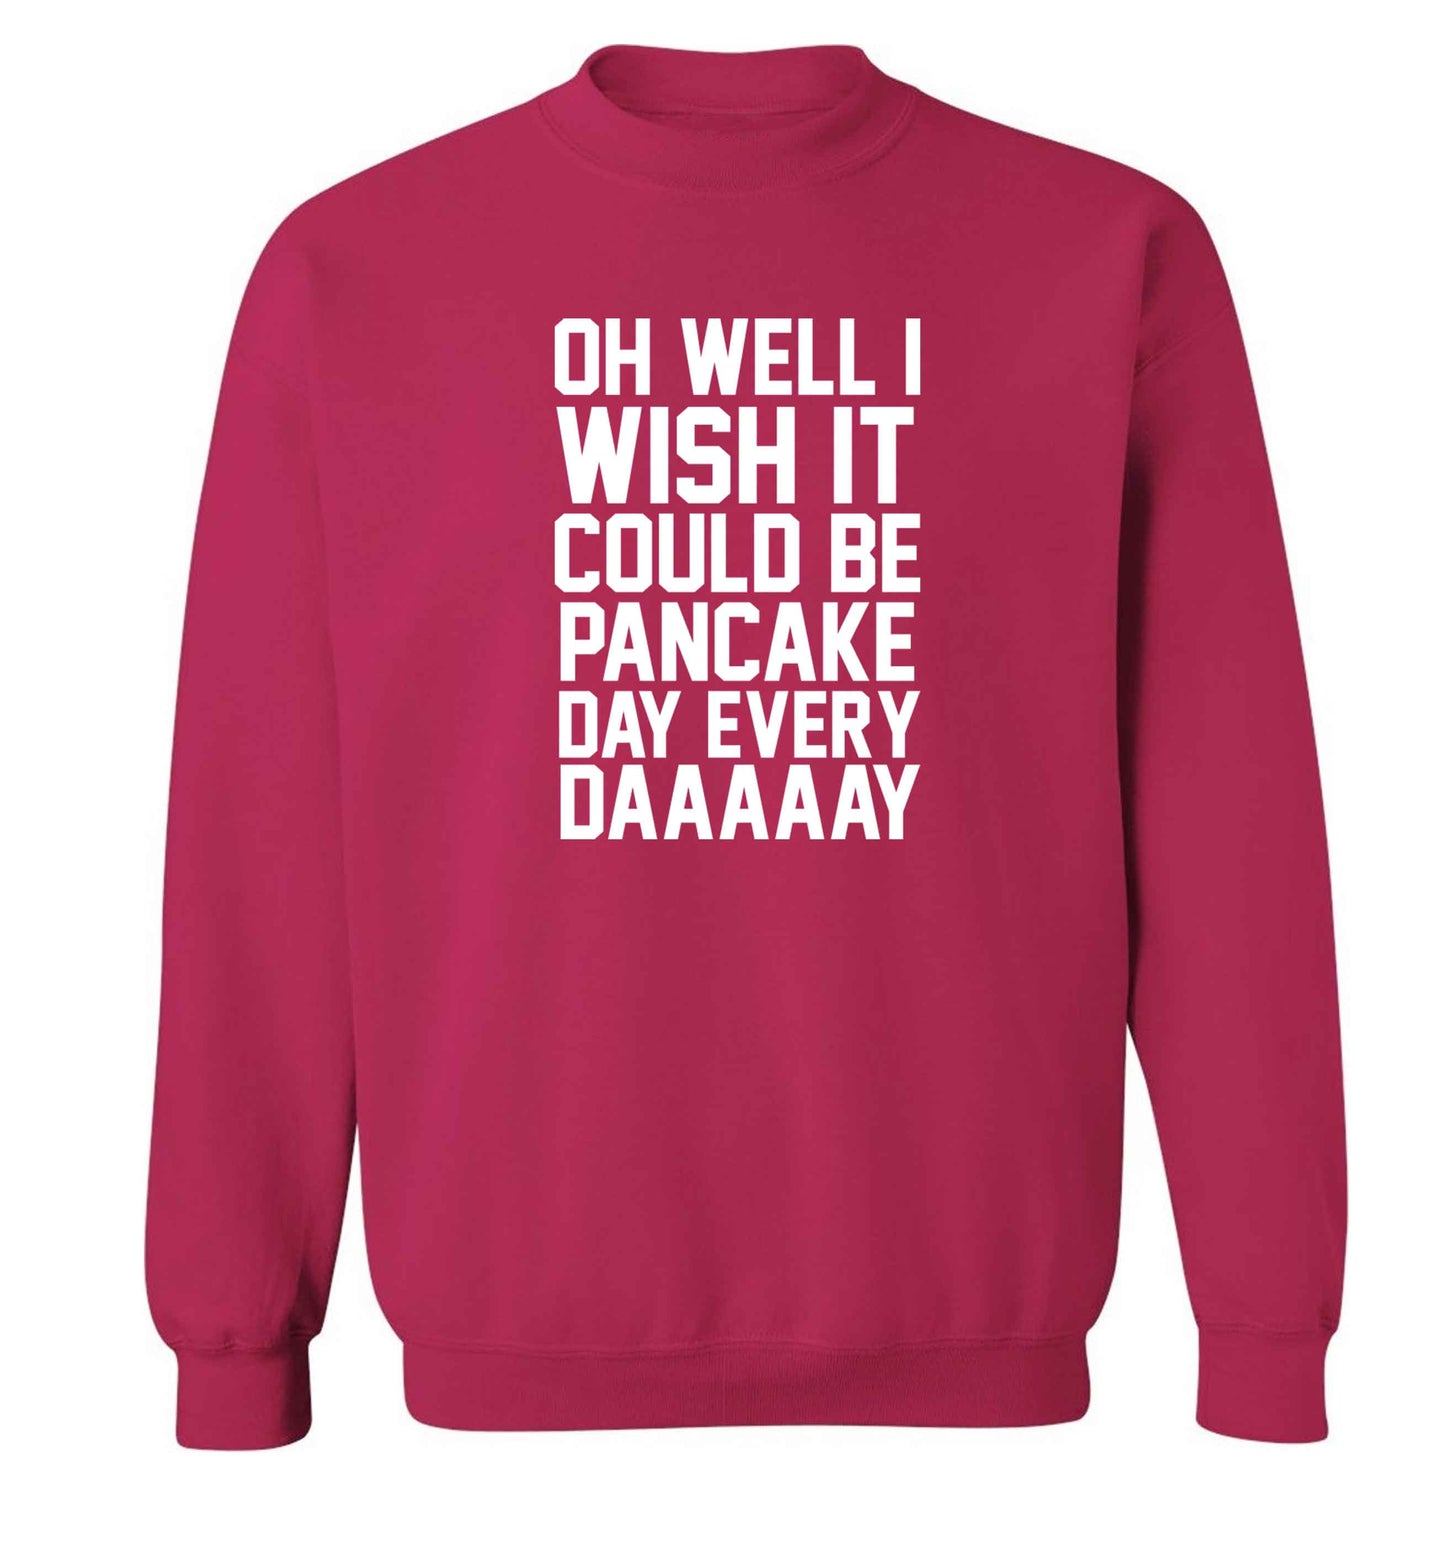 Oh well I wish it could be pancake day every day adult's unisex pink sweater 2XL